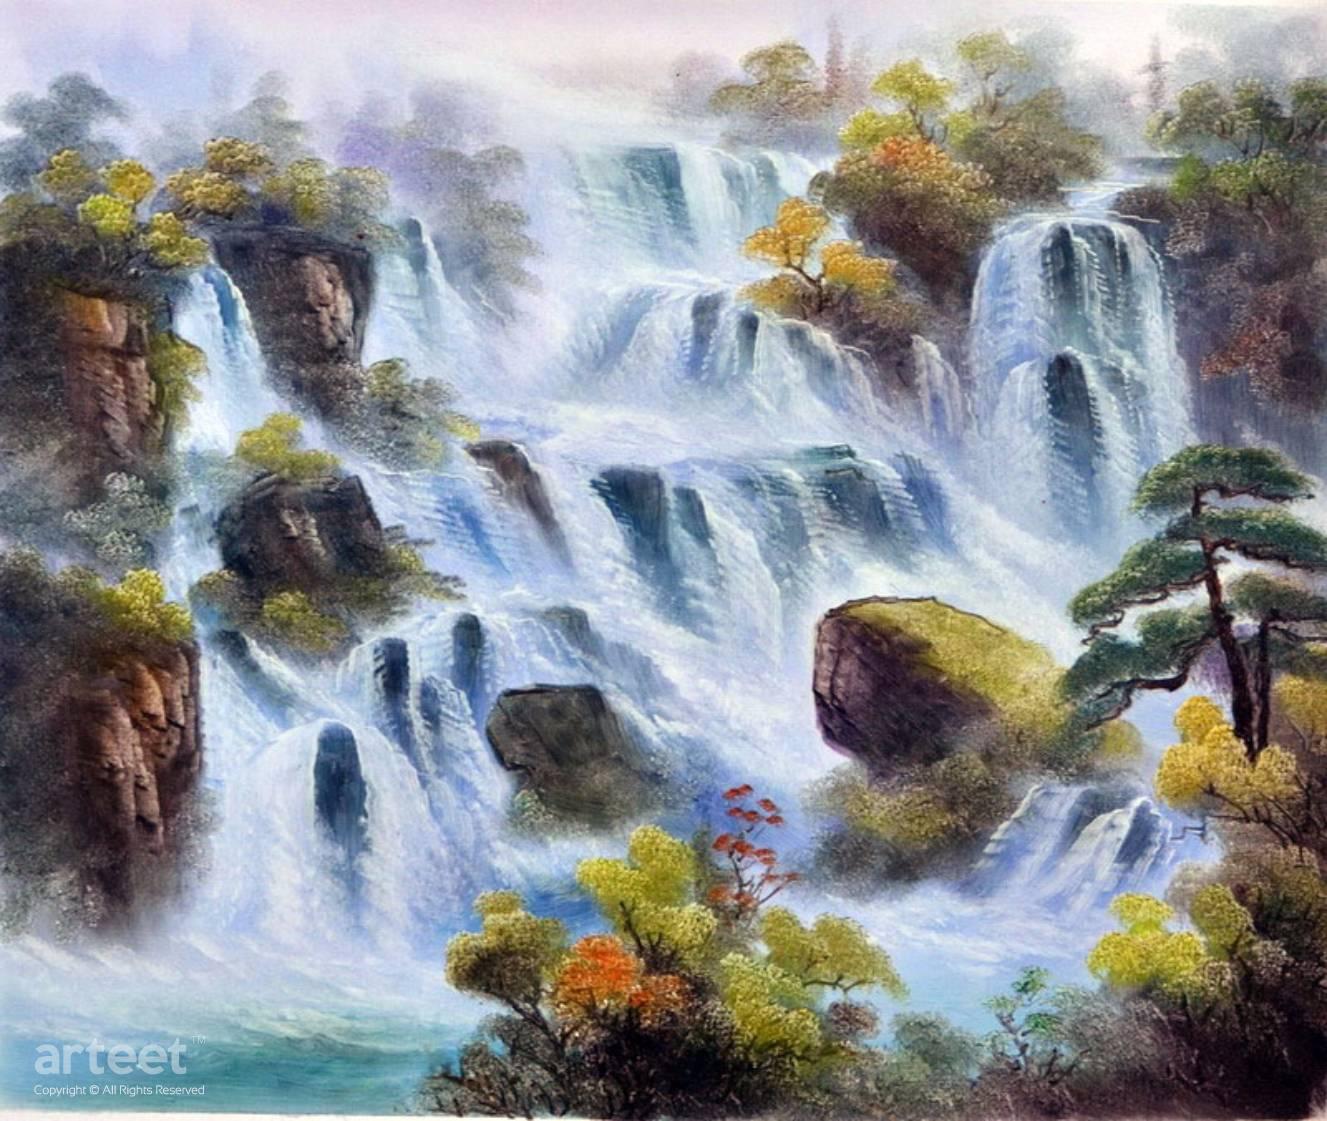 Springtime Cascade Art Paintings For Sale Online Gallery